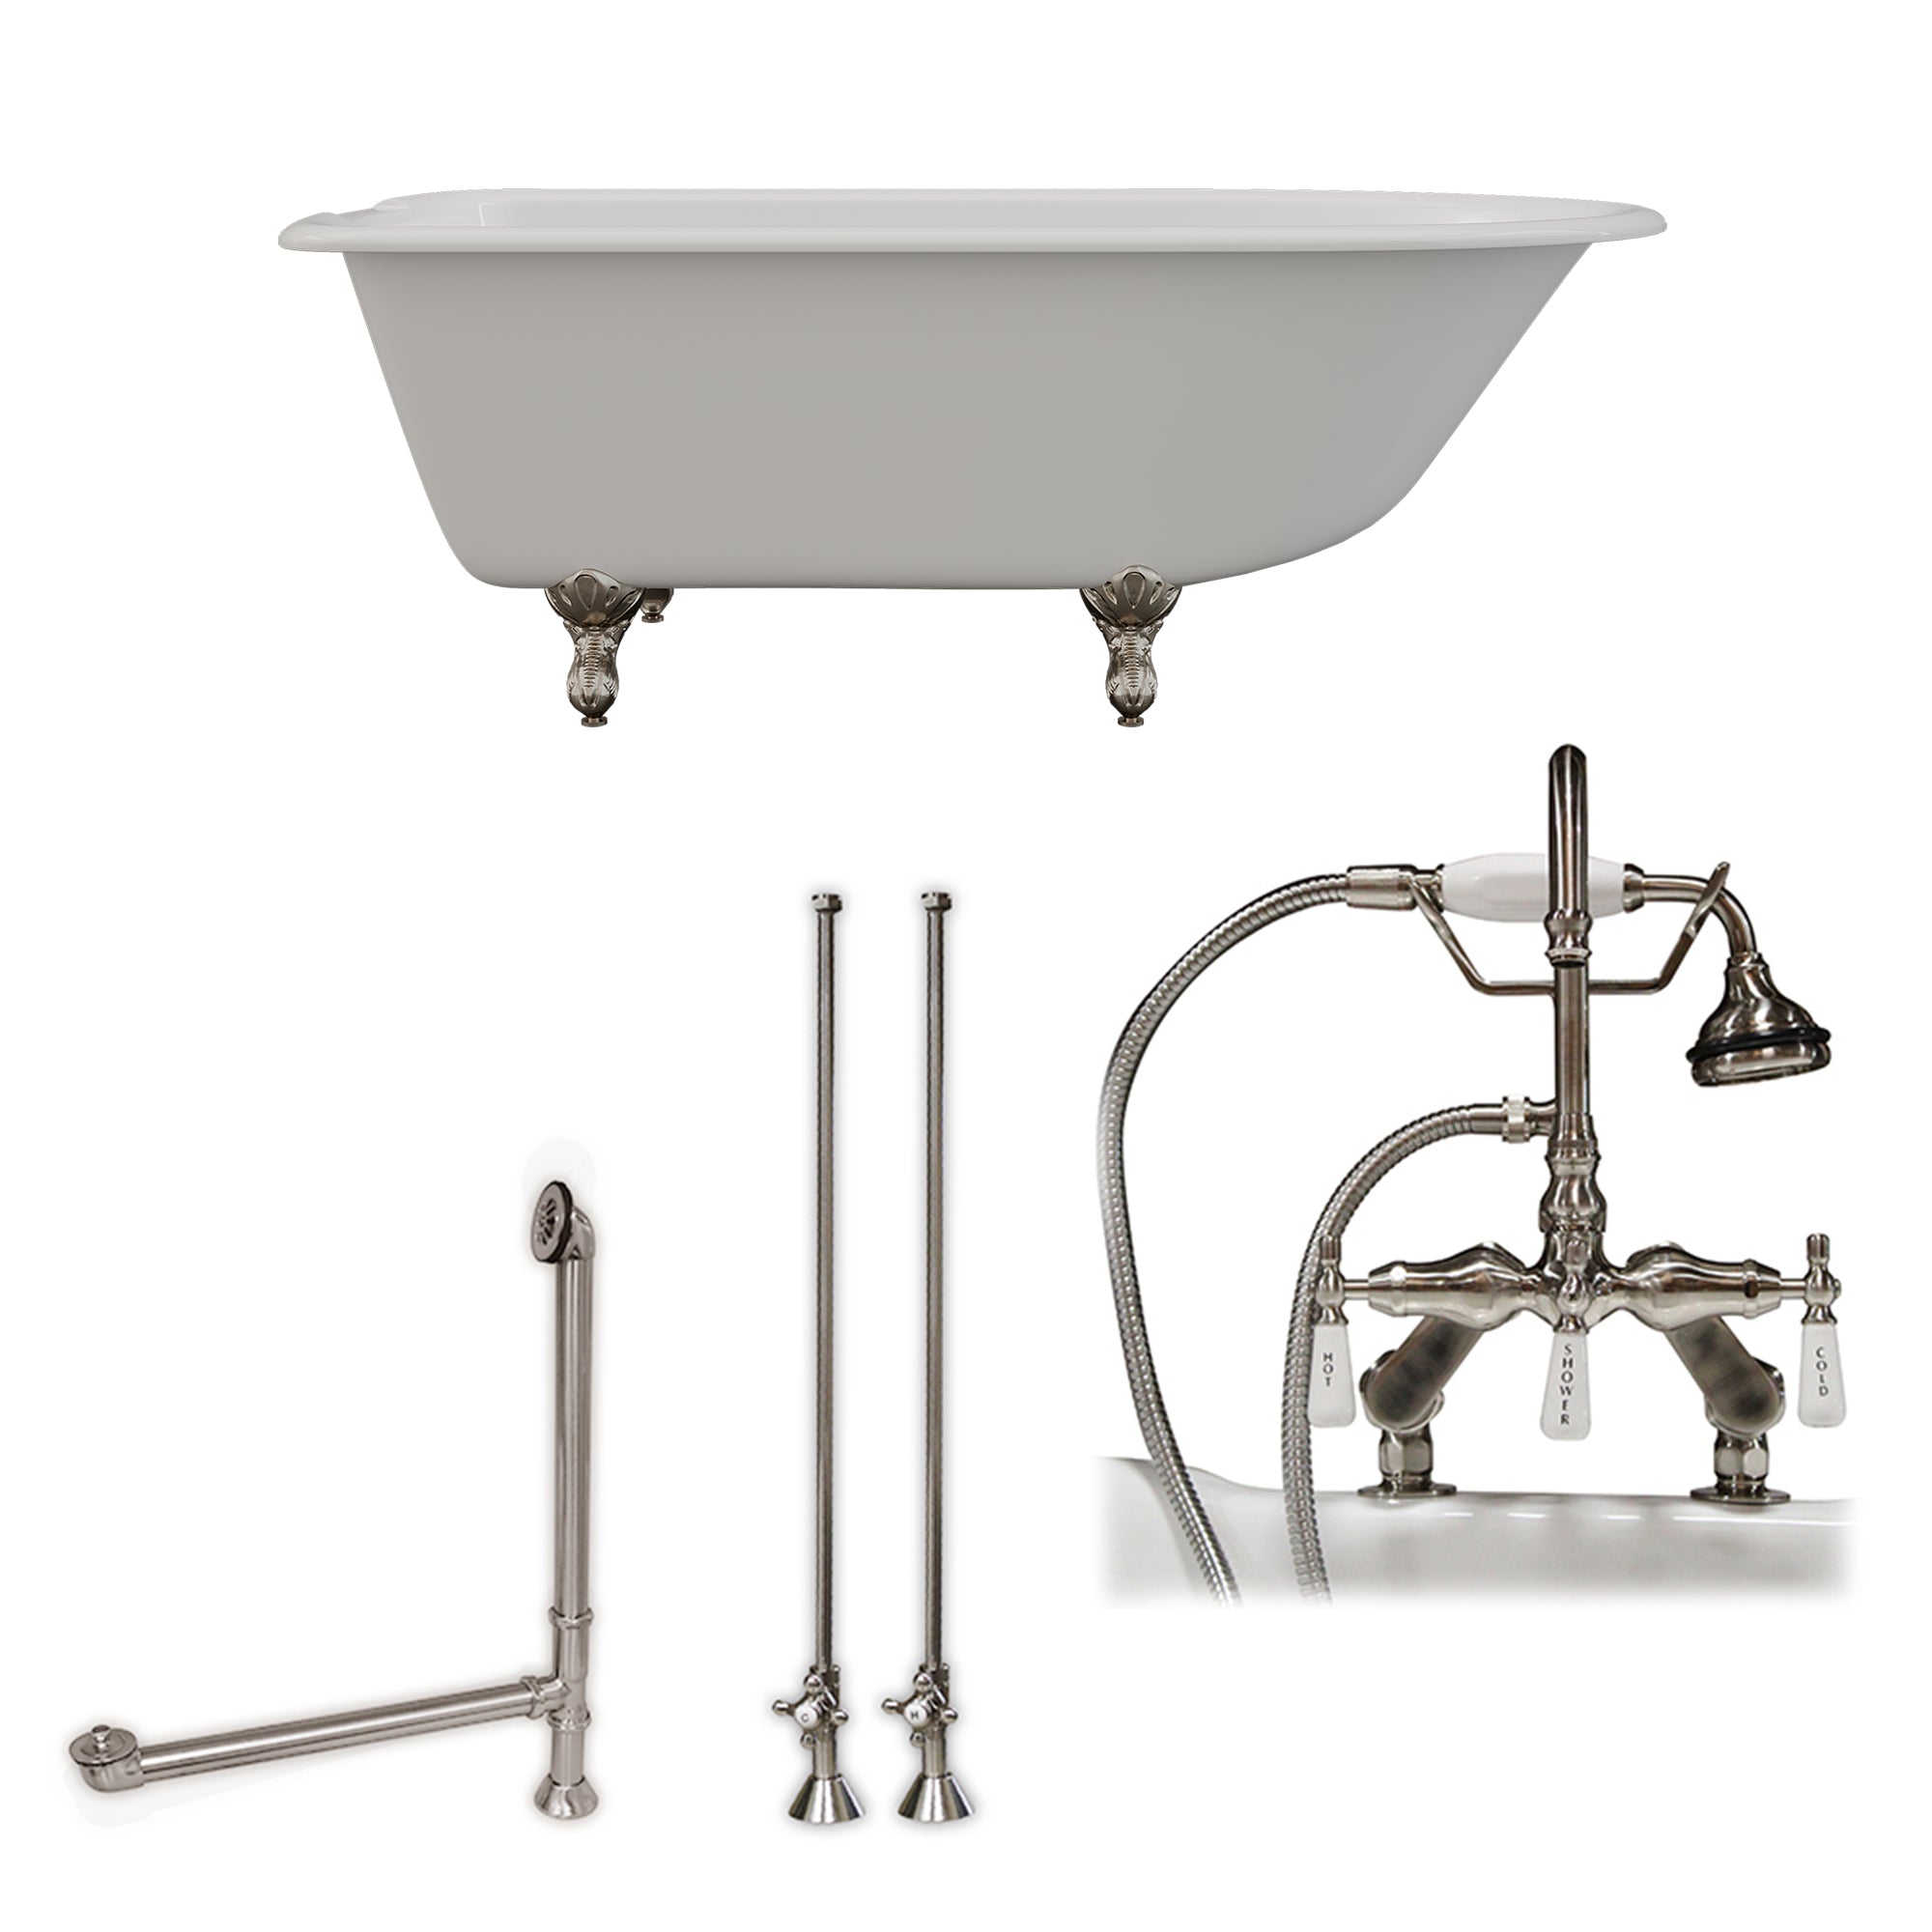 Cambridge Plumbing 60-Inch Rolled Rim Cast Iron Clawfoot Tub (Porcelain enamel interior and white paint exterior) and Deck Mount Plumbing Package (Brushed Nickel) RR61-684D-PKG-7DH - Vital Hydrotherapy